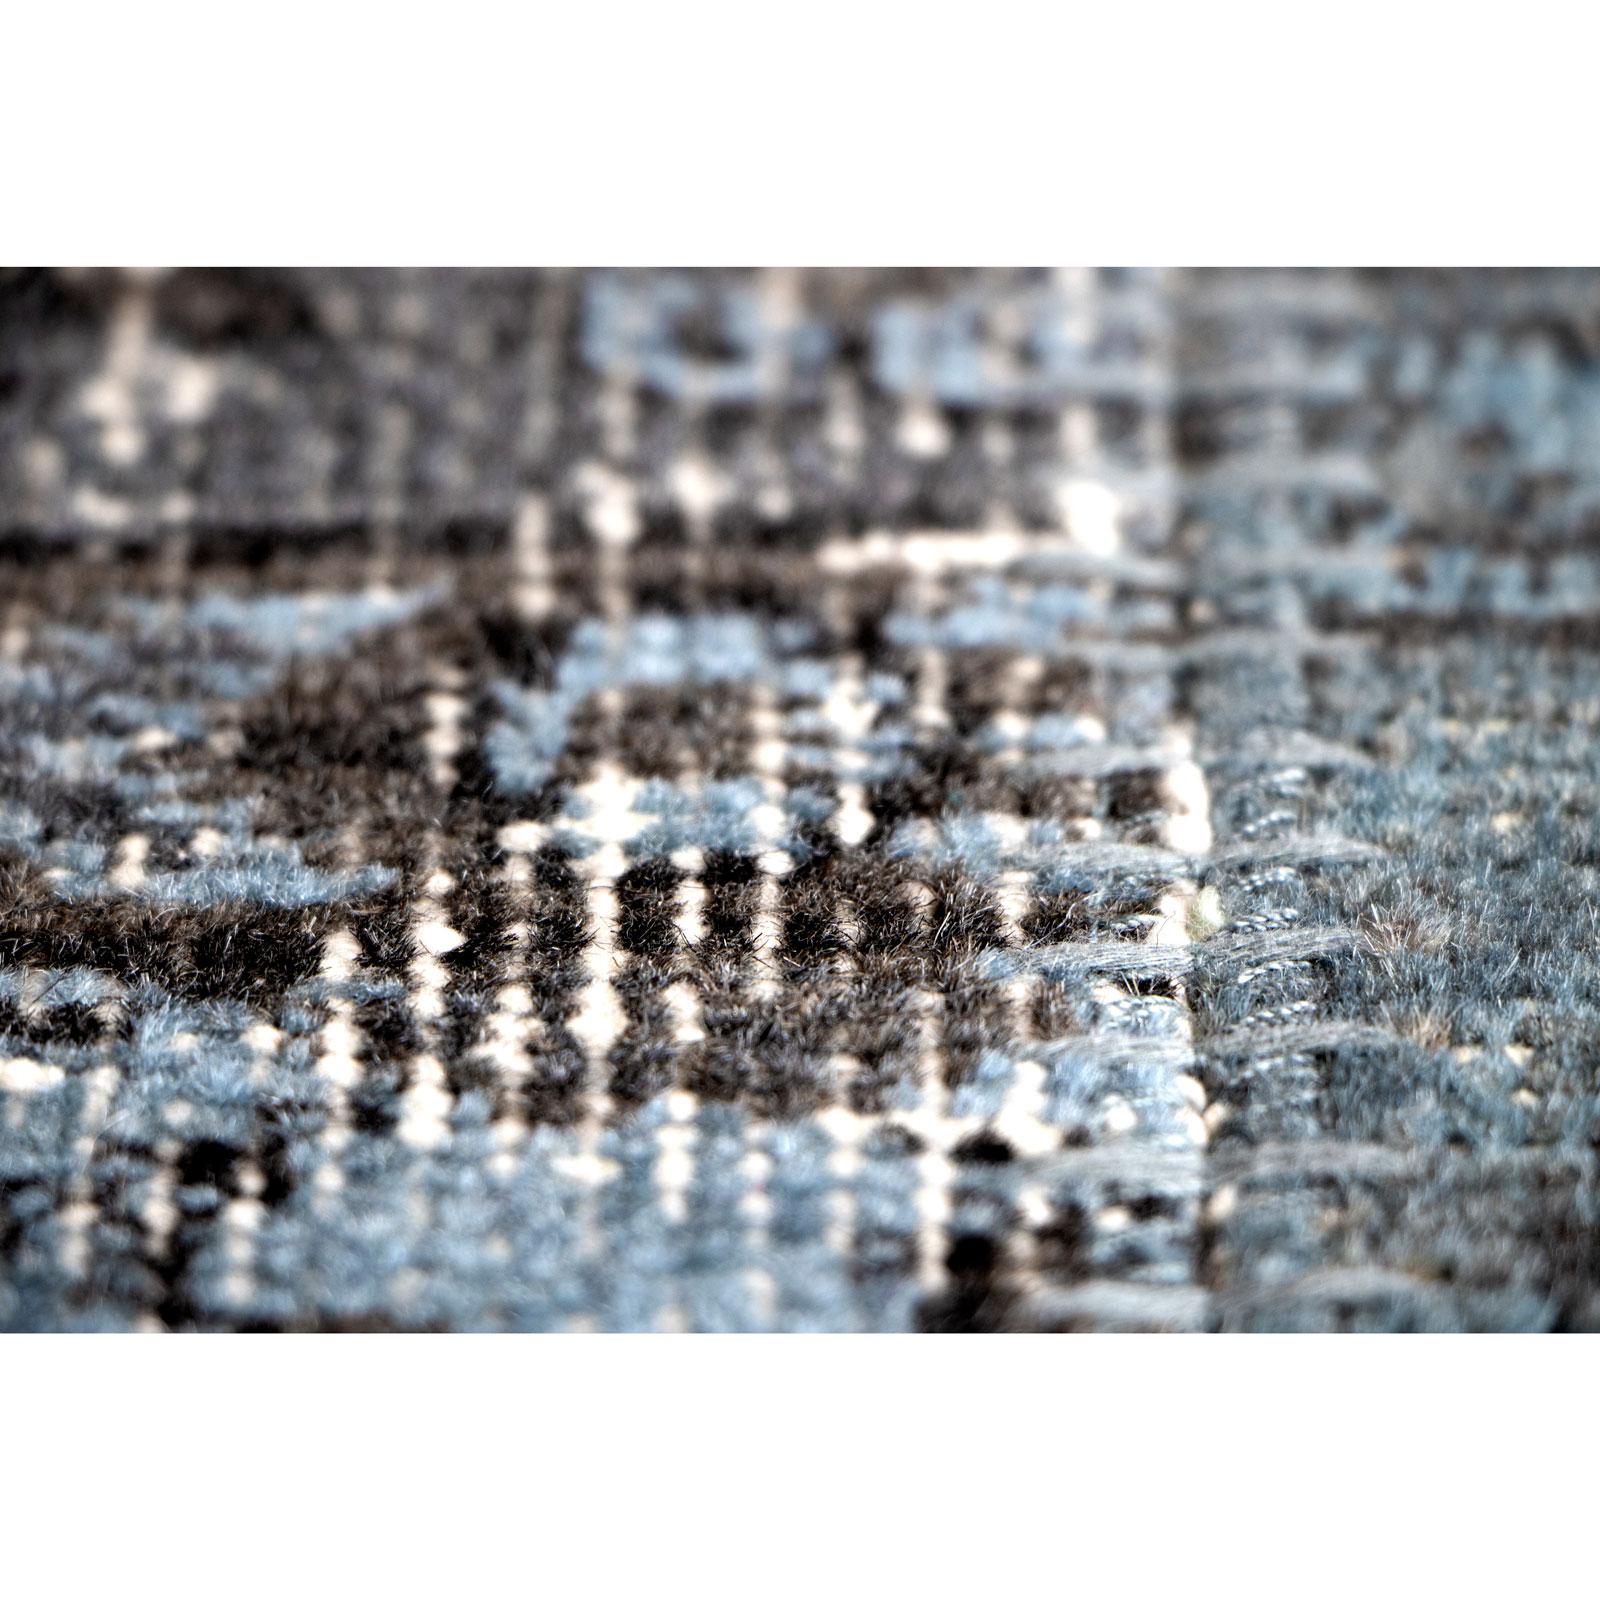 Antique Chic Vintage Blue Brown Wool Cotton Rug by Deanna Comellini 250x350 cm For Sale 1